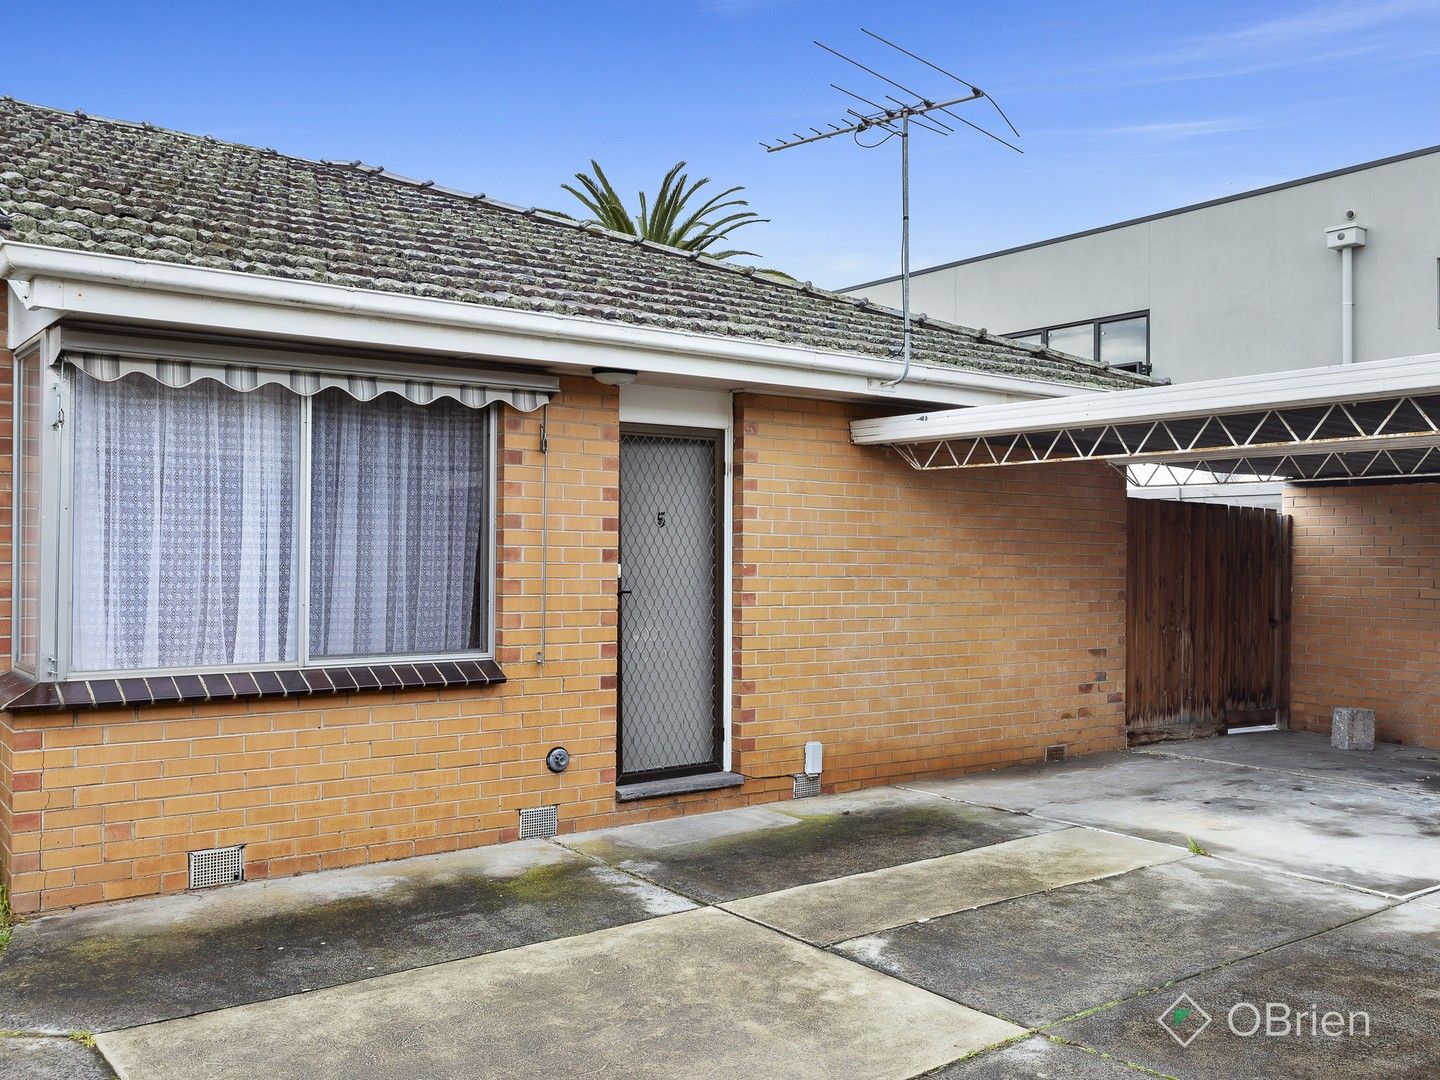 Sold 5 30 Collins Street Mentone Vic 3194 On 21 Aug 21 Domain